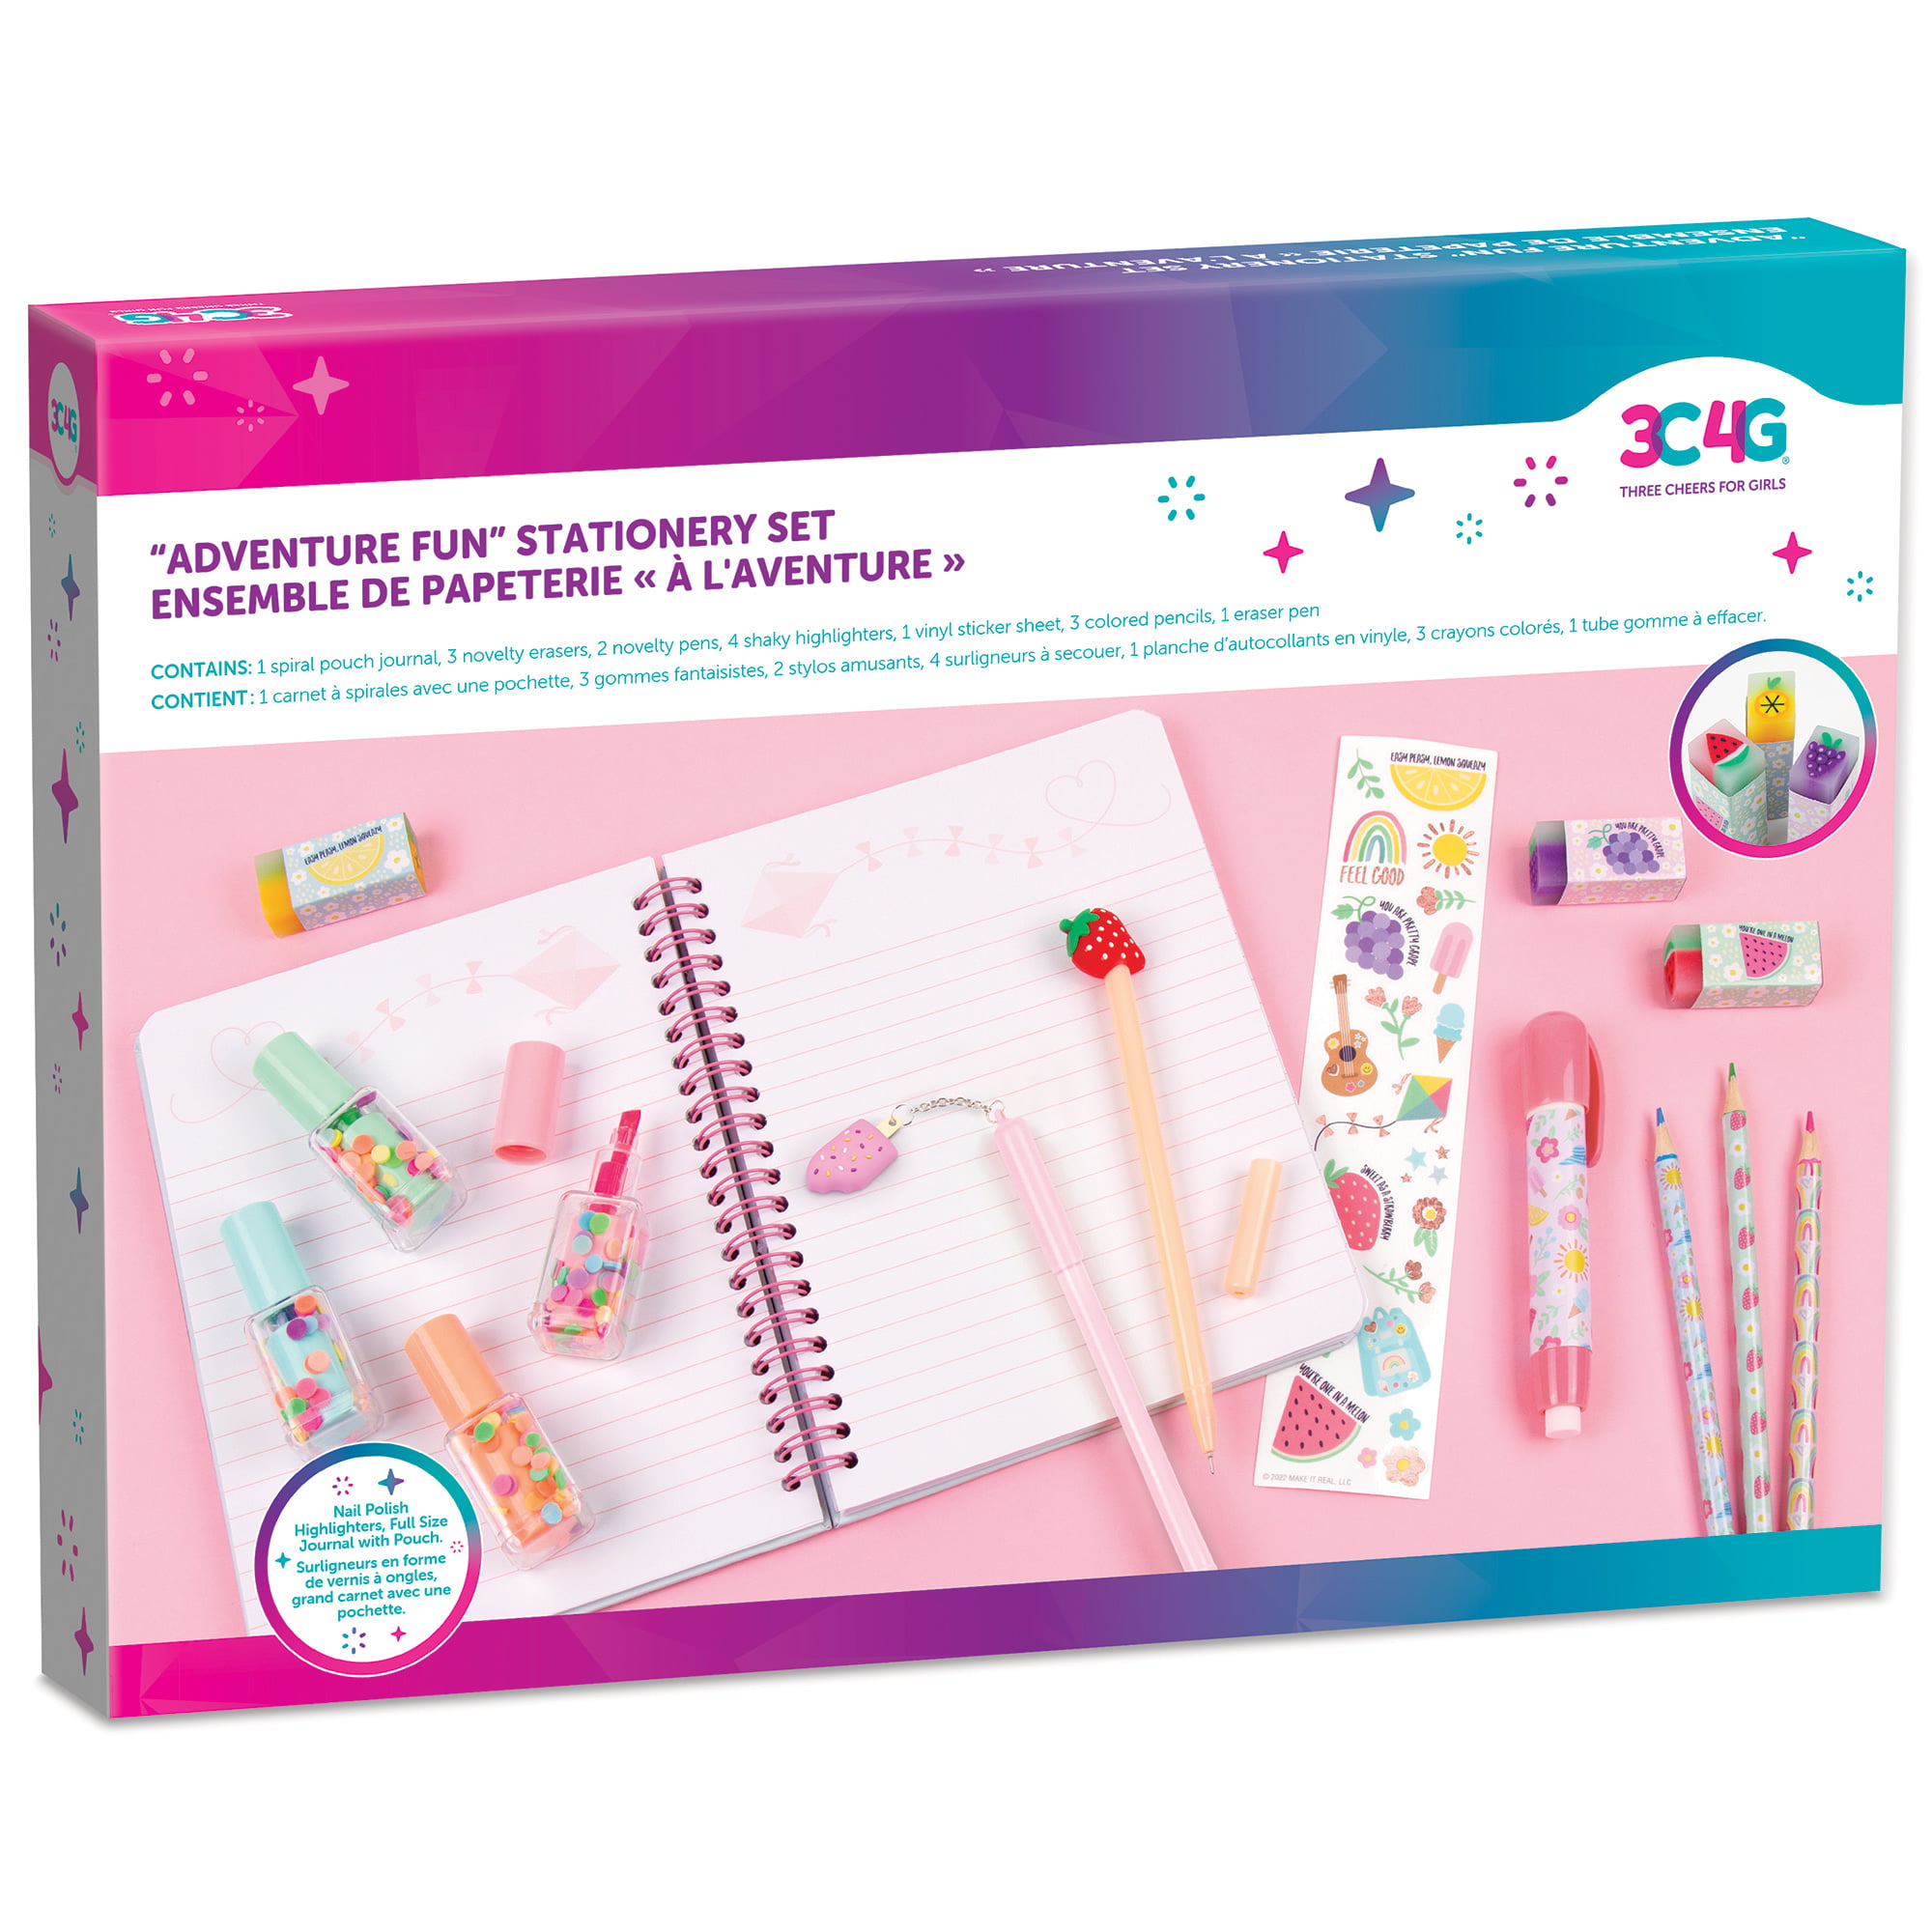 Cute Stationary Set for Girls With Cherries Set of 10 